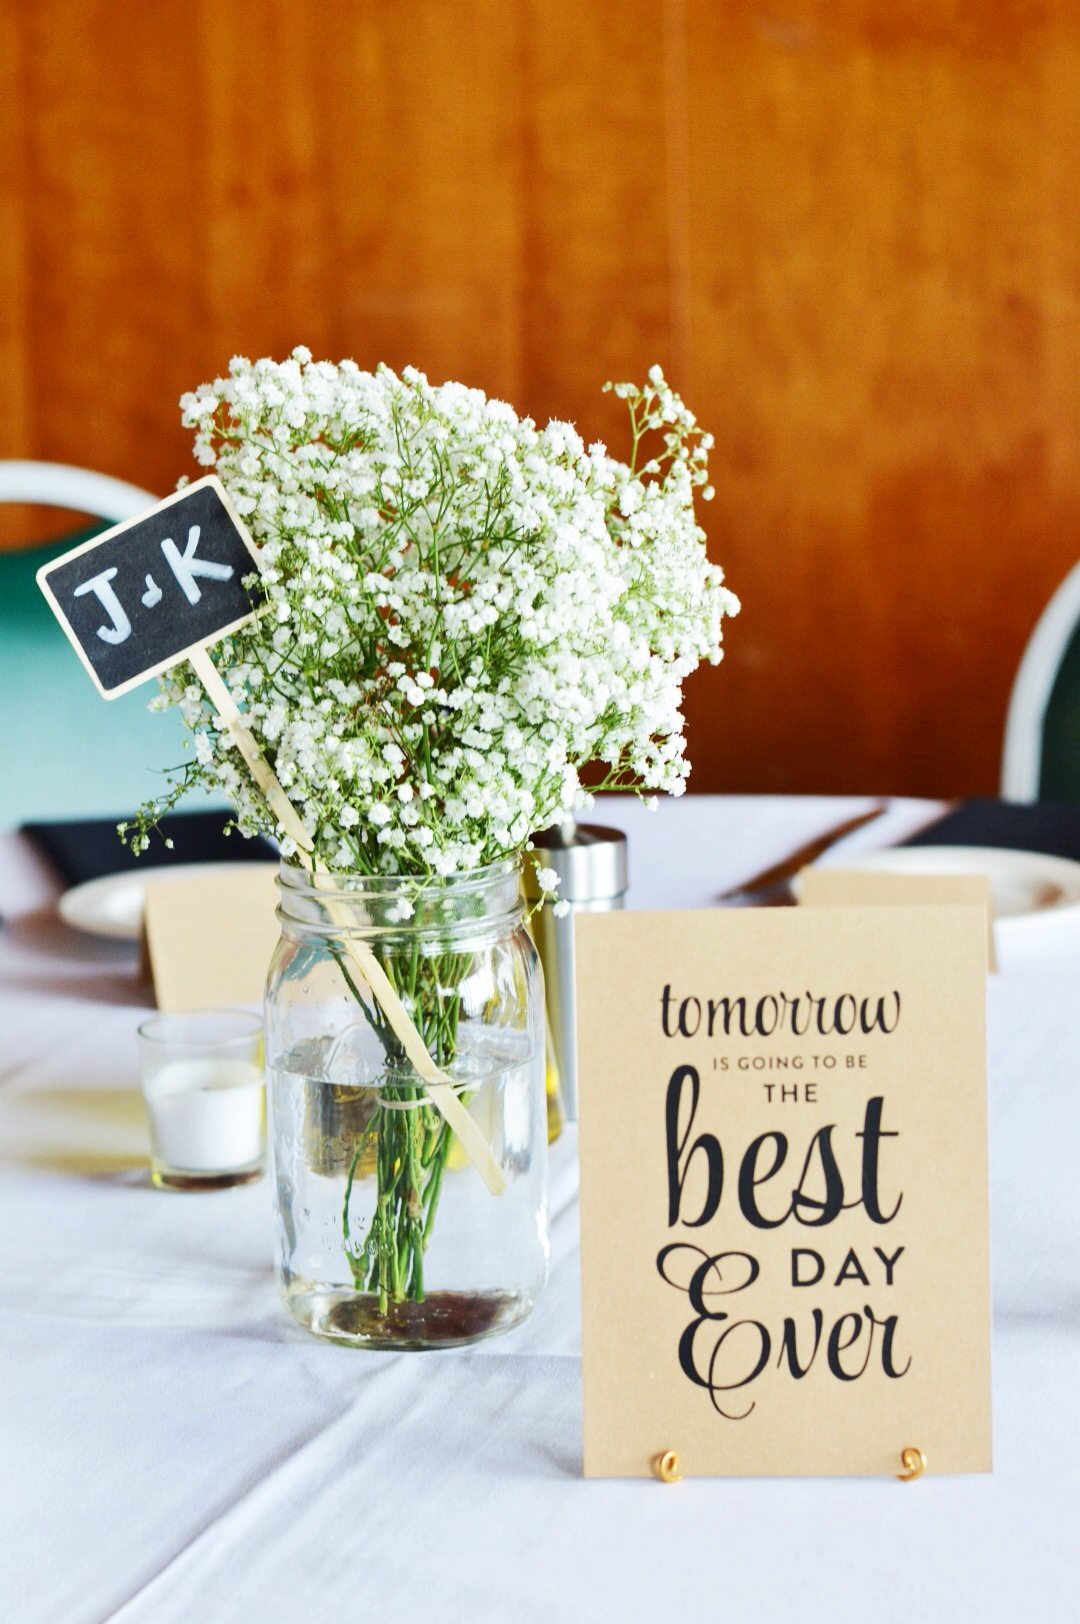 Top 15 Rehearsal Dinner Decorations Easy Recipes To Make at Home